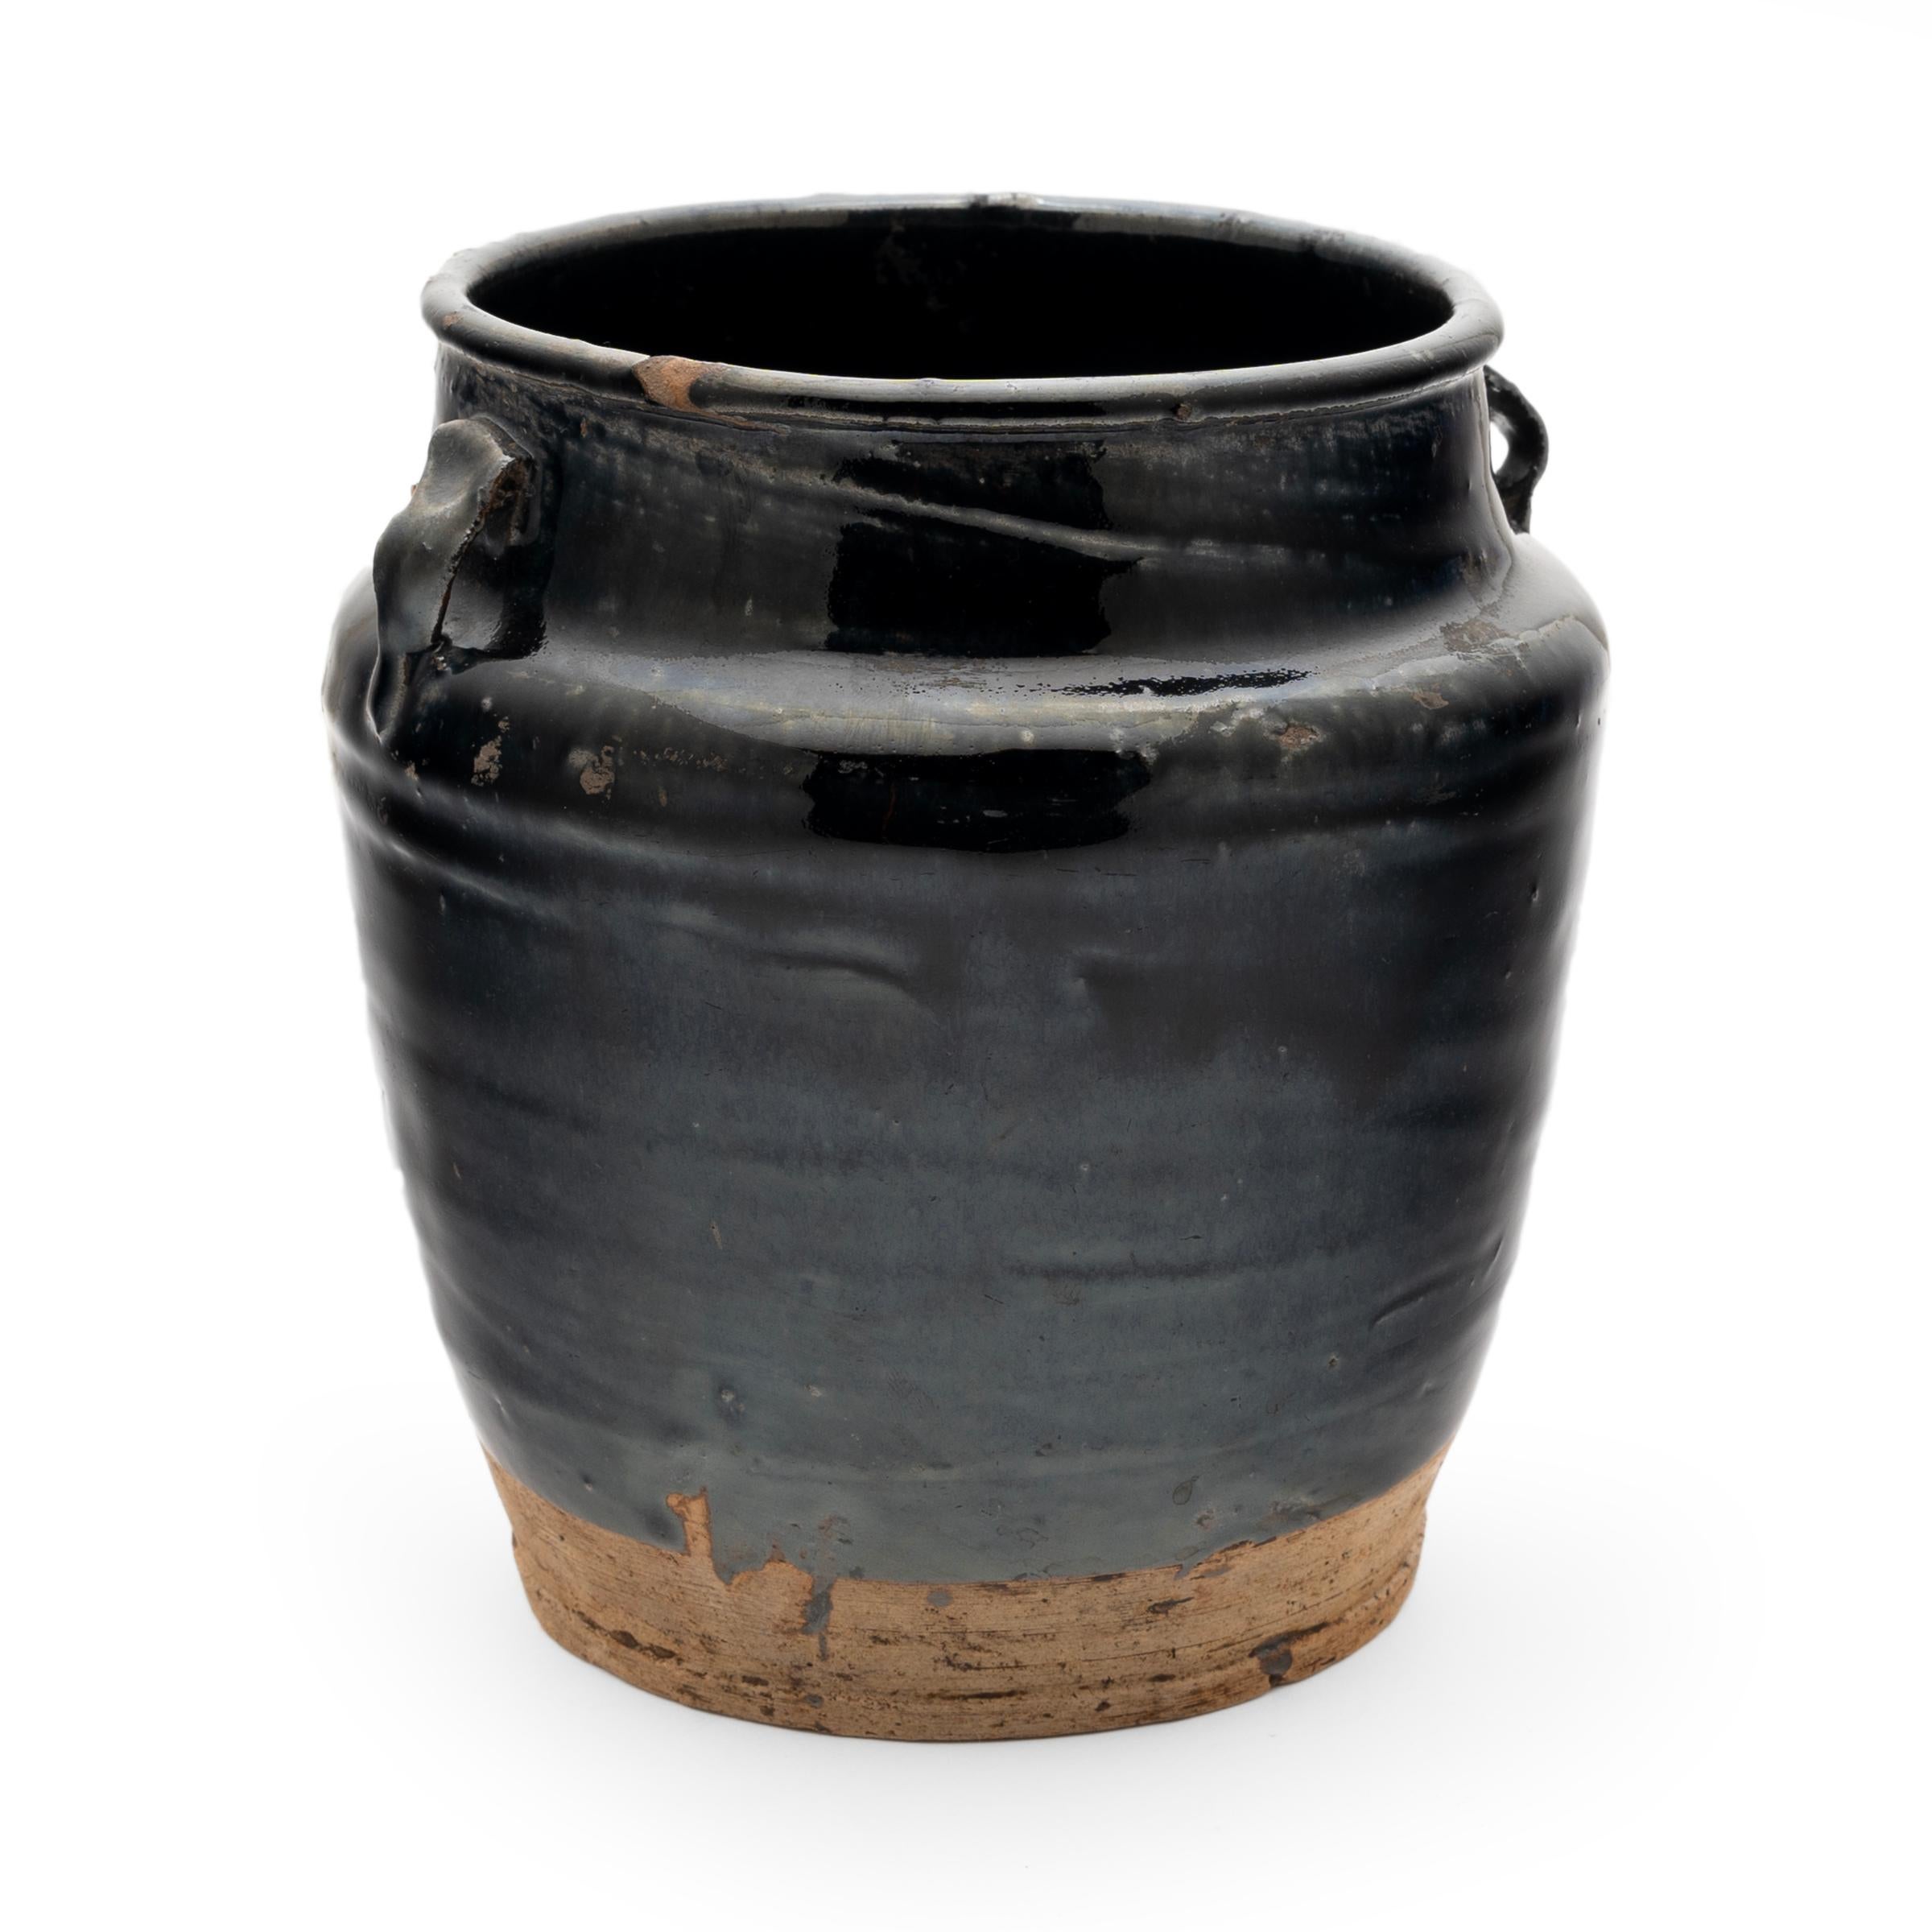 A cool, blue-black glaze coats the stout body of this early 20th-century terra cotta kitchen jar. As evidenced by the glazed interior, this wide-mouth jar was once used daily in a provincial Chinese kitchen for fermenting foods and condiments. The